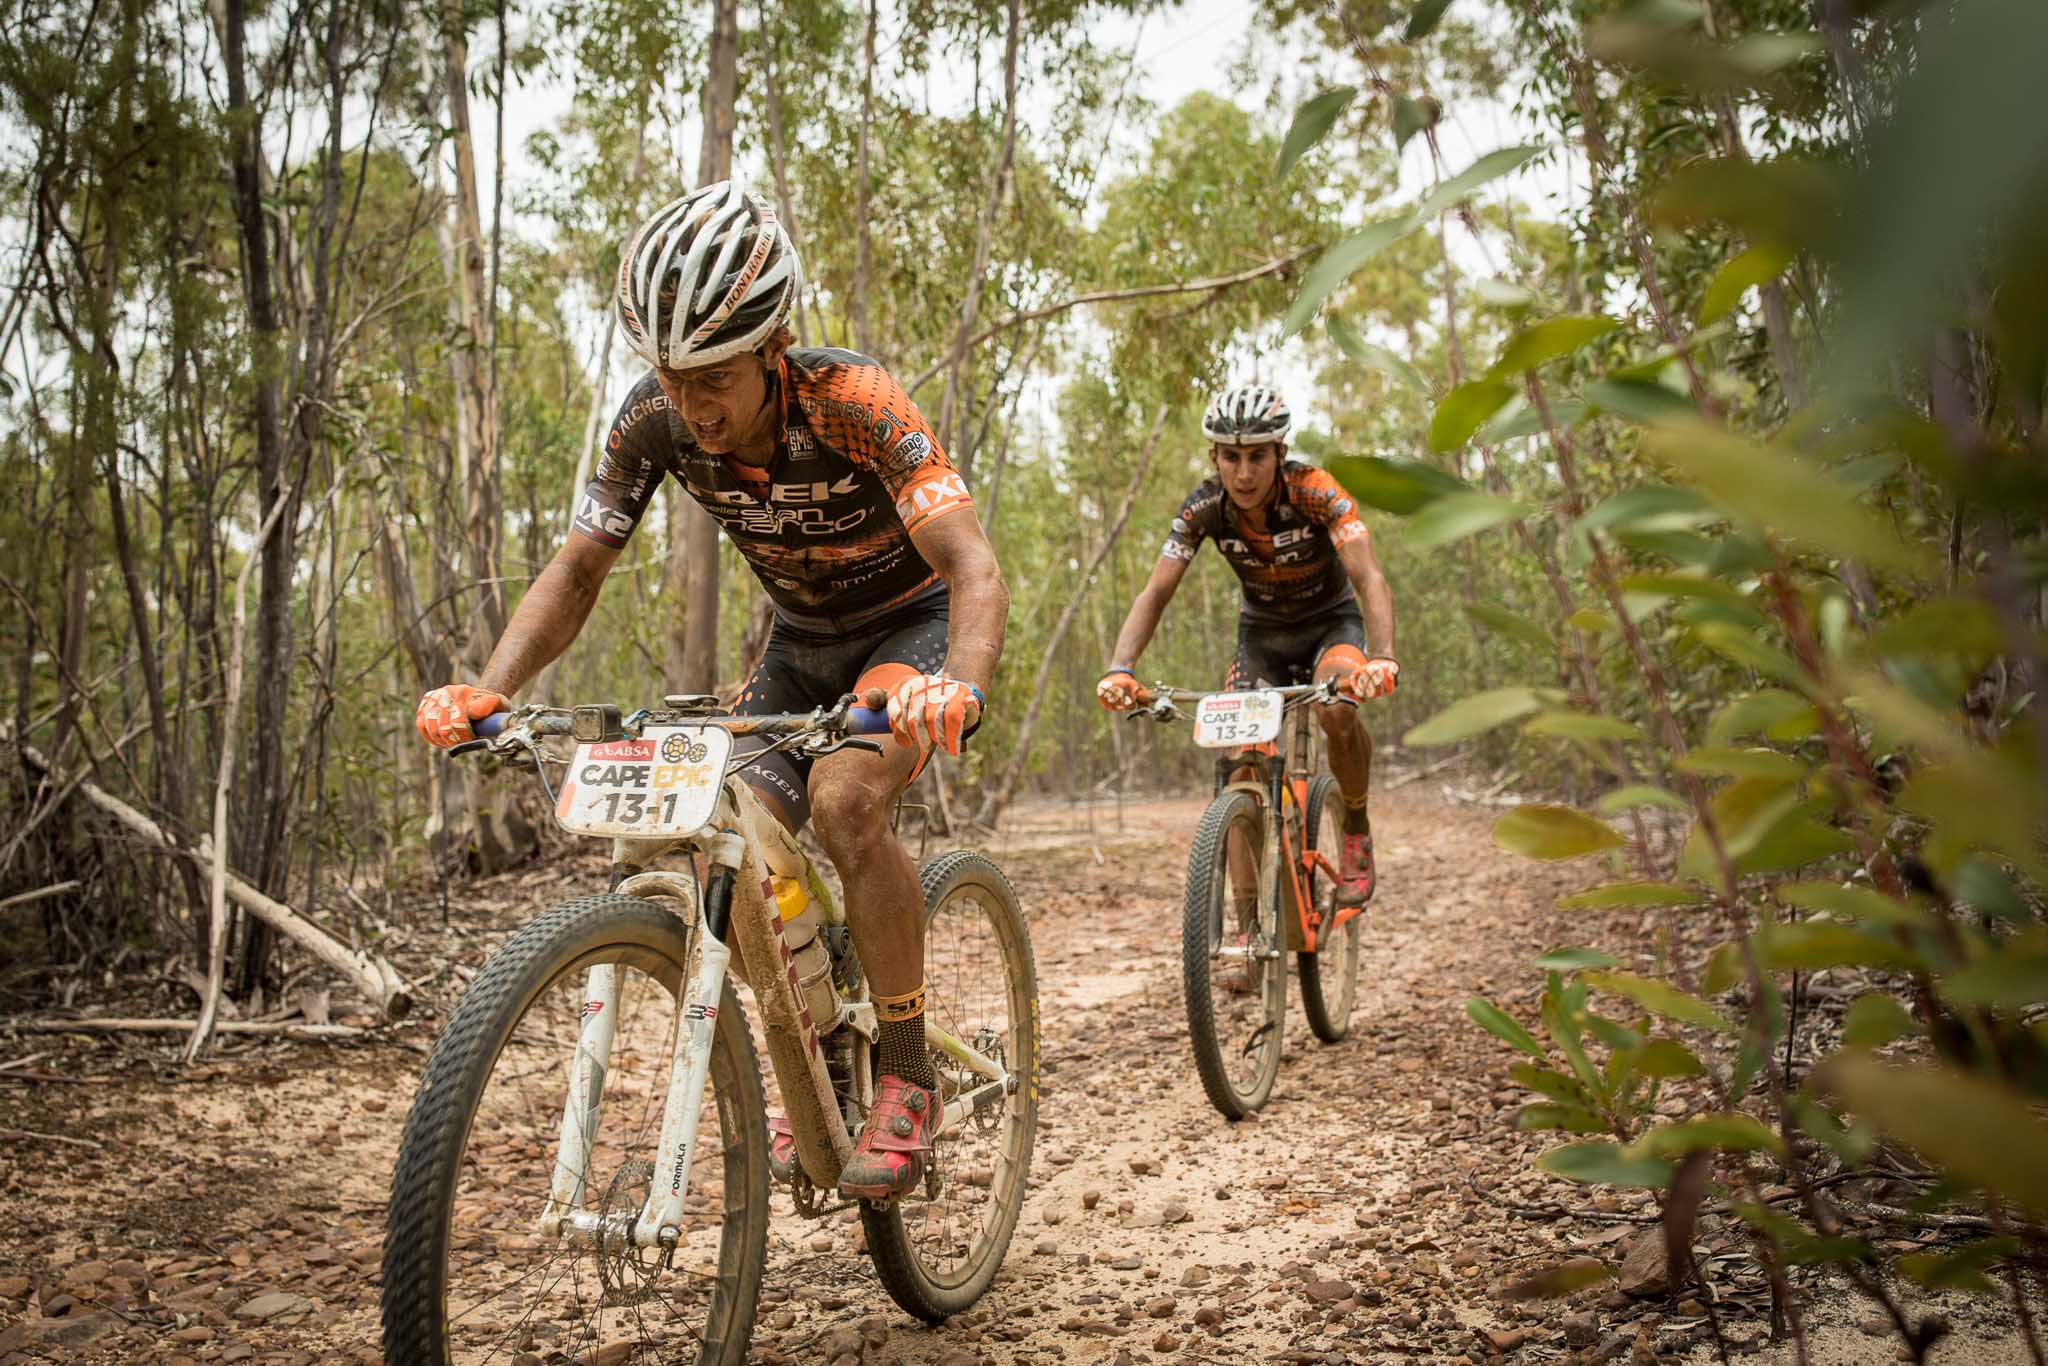 Samuele Porro and Damiano Ferraro of Team Trek-Selle San Marco A during stage 4 of the 2016 Absa Cape Epic Mountain Bike stage race from the Cape Peninsula University of Technology in Wellington, South Africa on the 17th March 2016 Photo by Nick Muzik/Cape Epic/SPORTZPICS PLEASE ENSURE THE APPROPRIATE CREDIT IS GIVEN TO THE PHOTOGRAPHER AND SPORTZPICS ALONG WITH THE ABSA CAPE EPIC ace2016